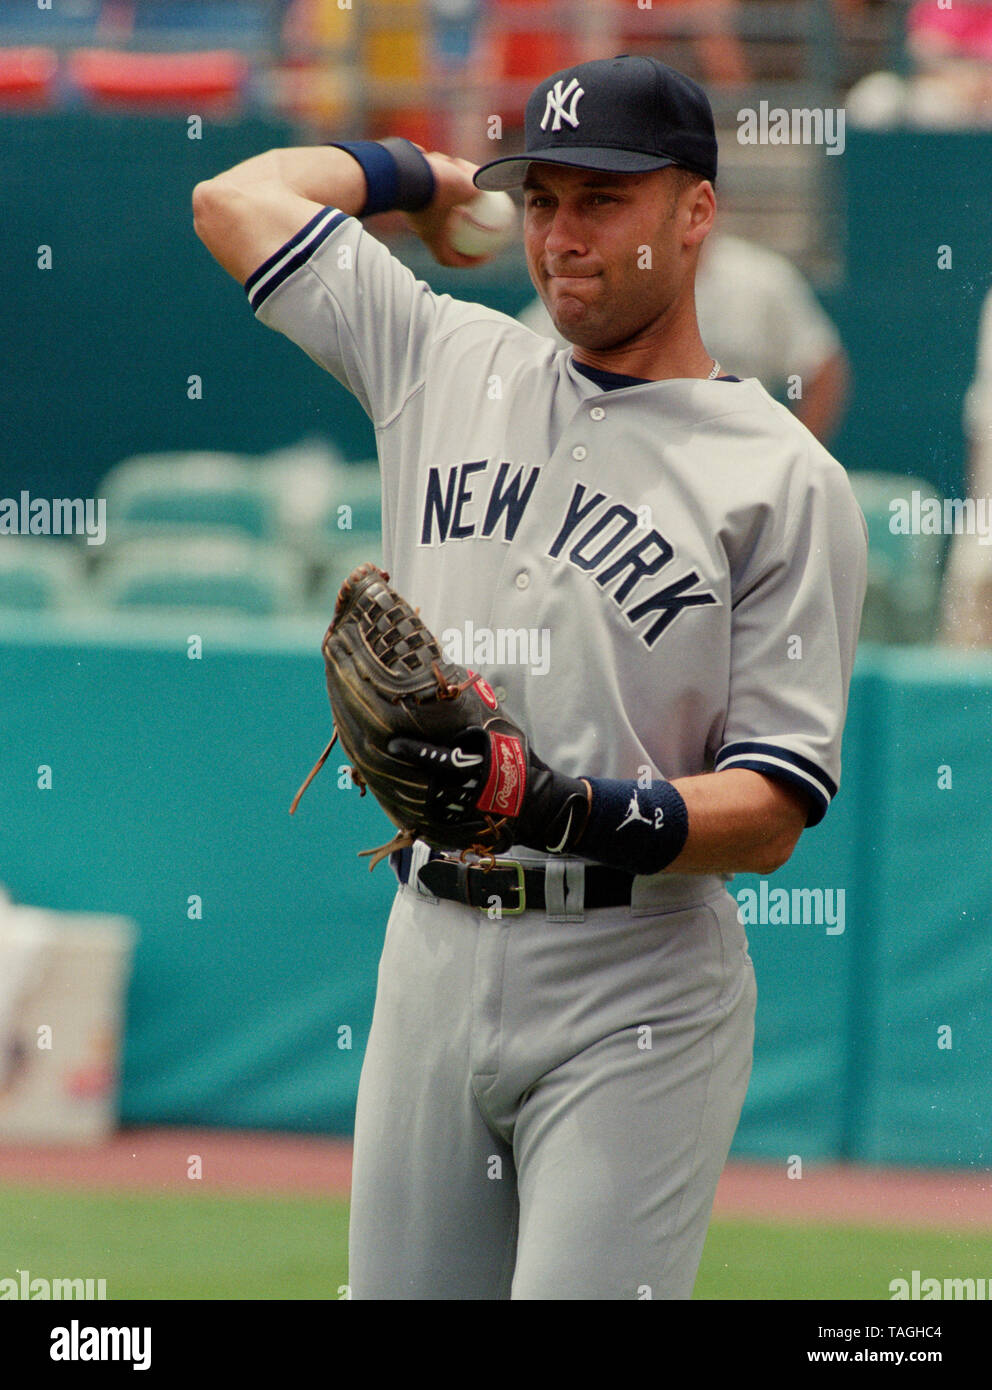 New York Yankee Derek Jeter during a game with the Florida Marlins at Joe Robbie Stadium in 2001 in Miami Florida. Stock Photo